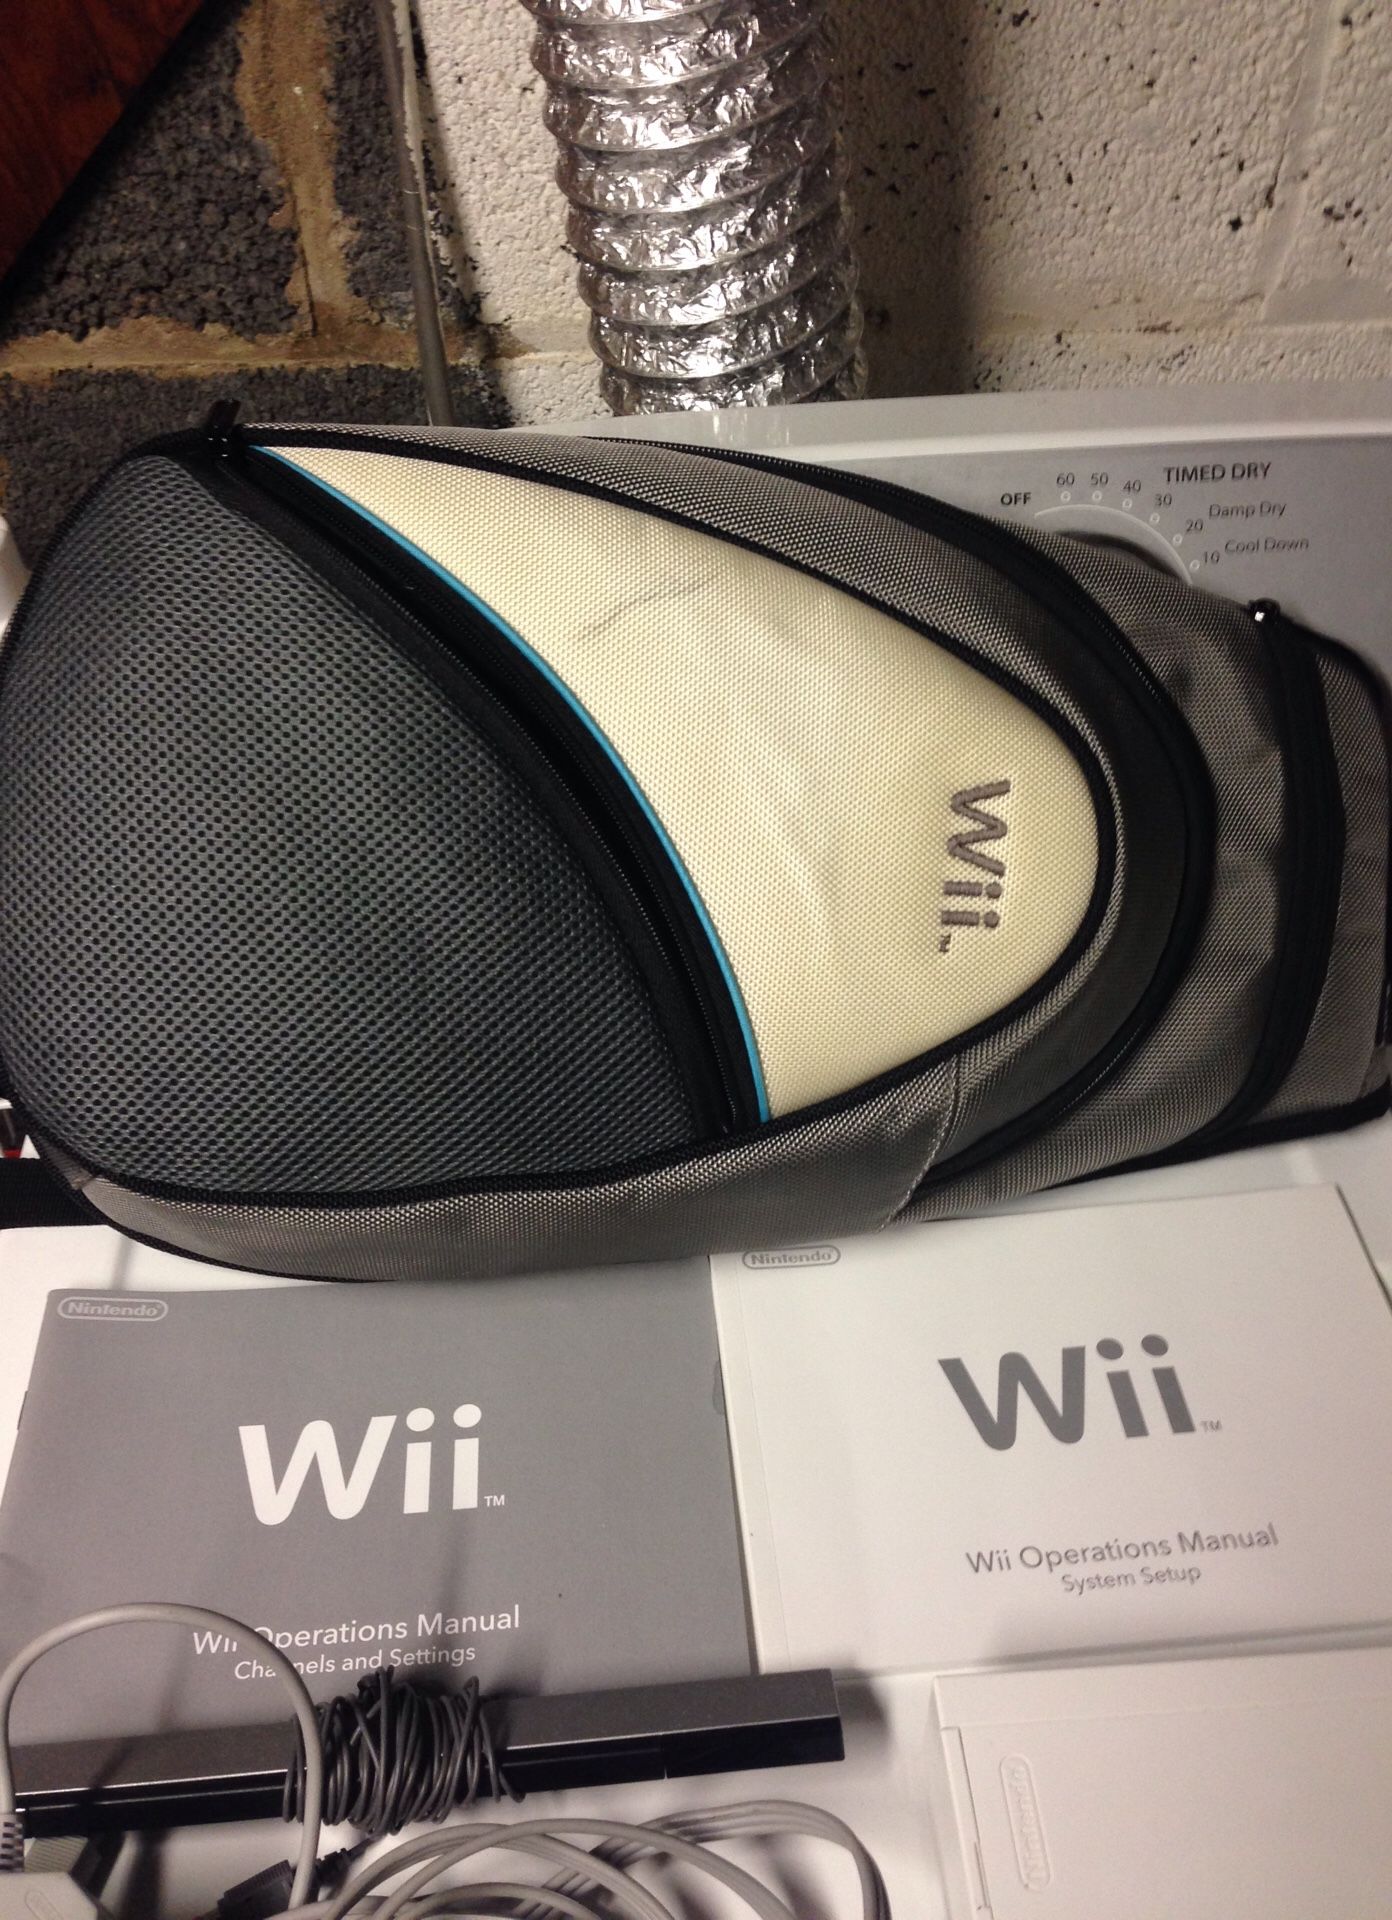 Nintendo wii with wii bag